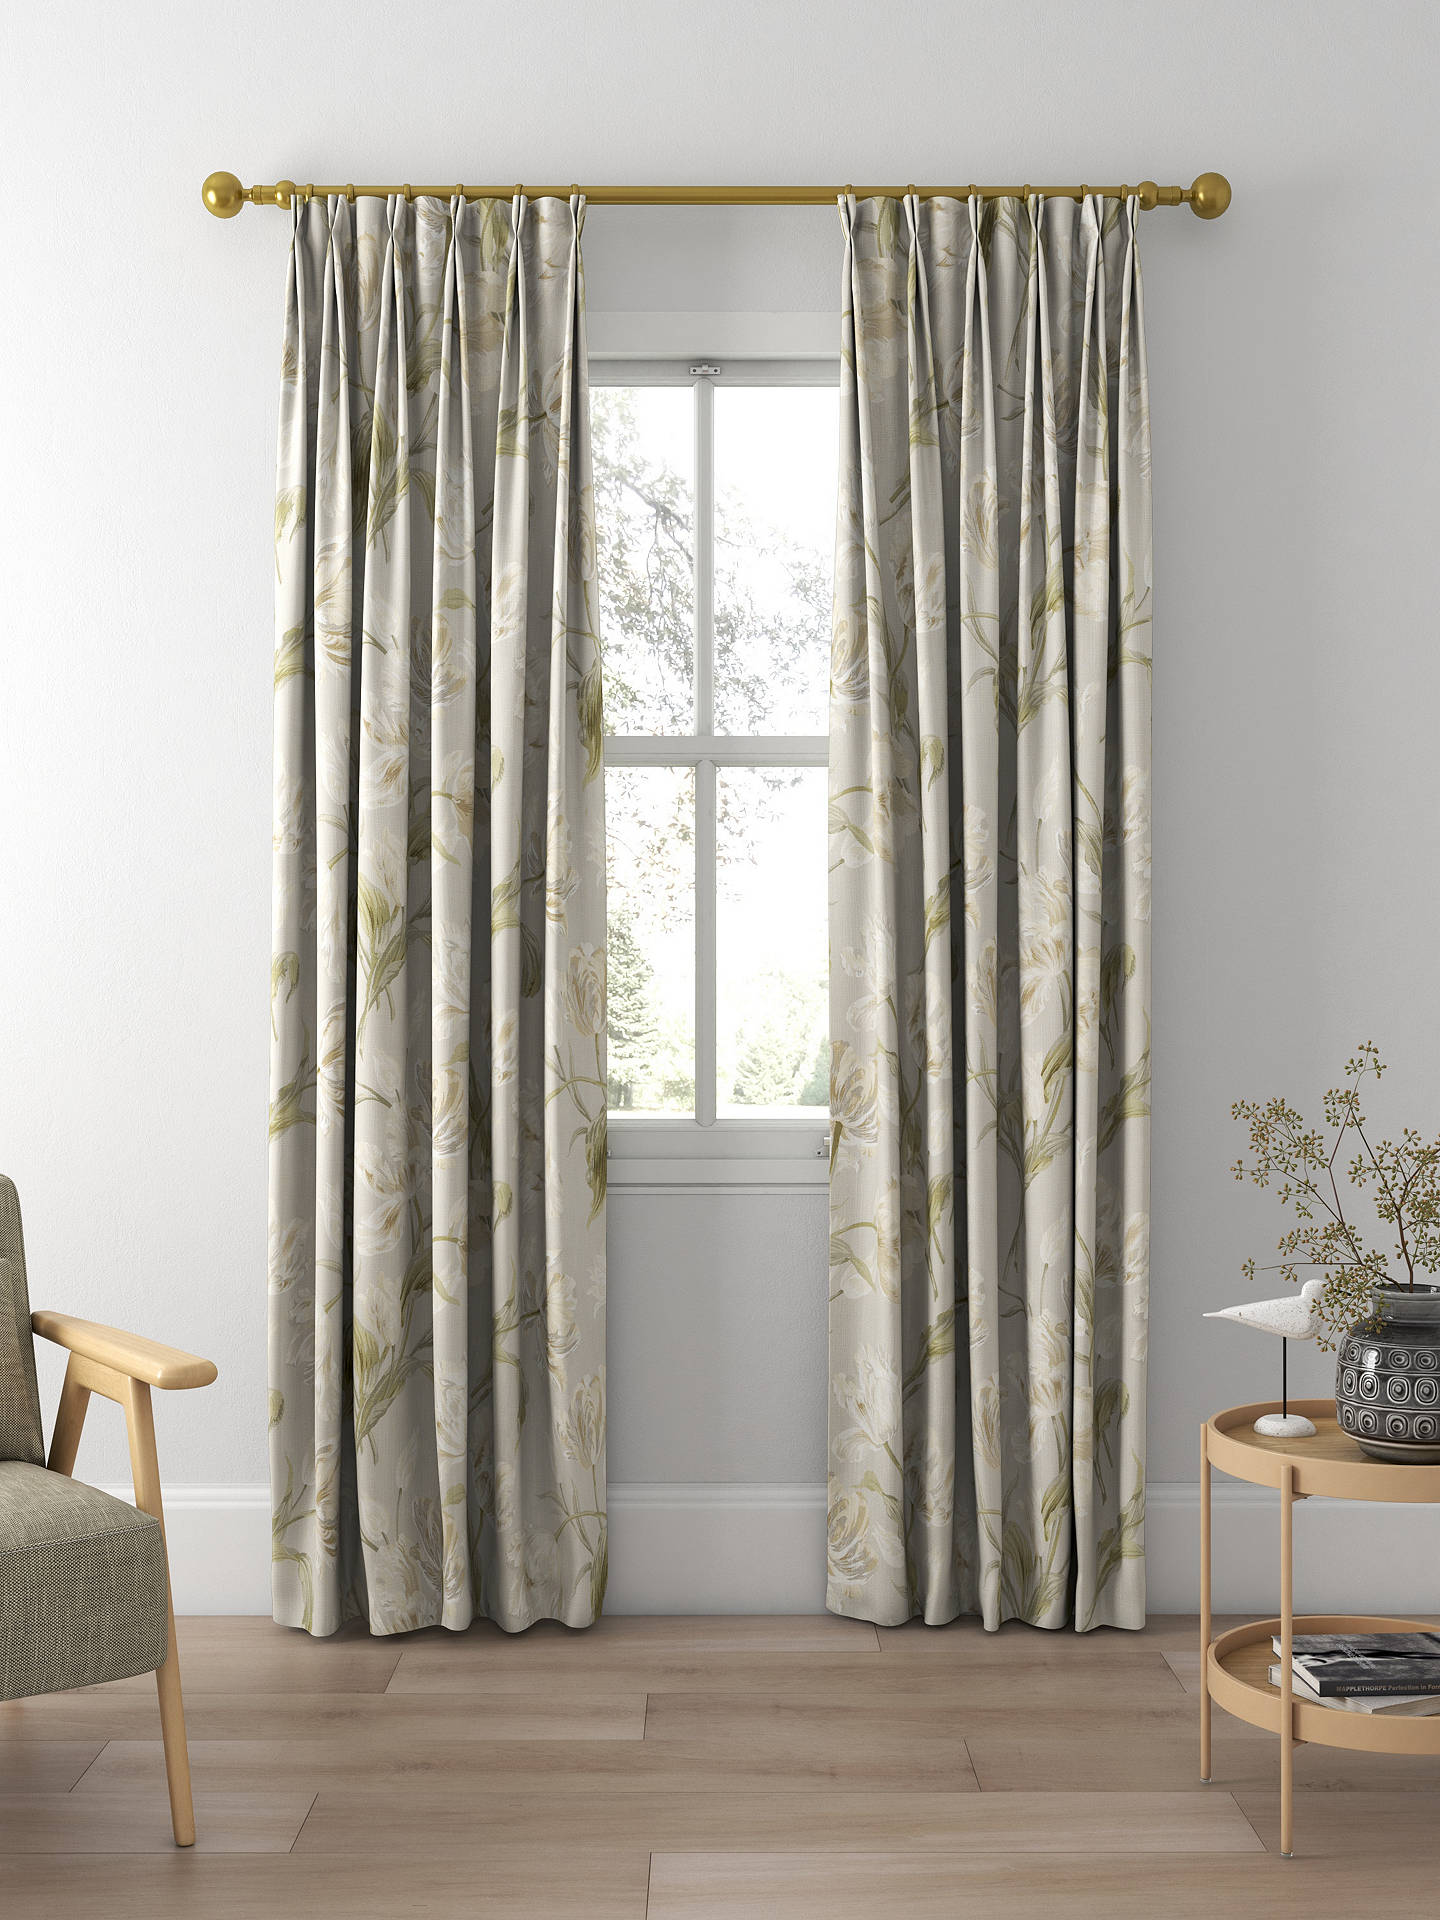 Laura Ashley Gosford Meadow Made to Measure Curtains, Sage